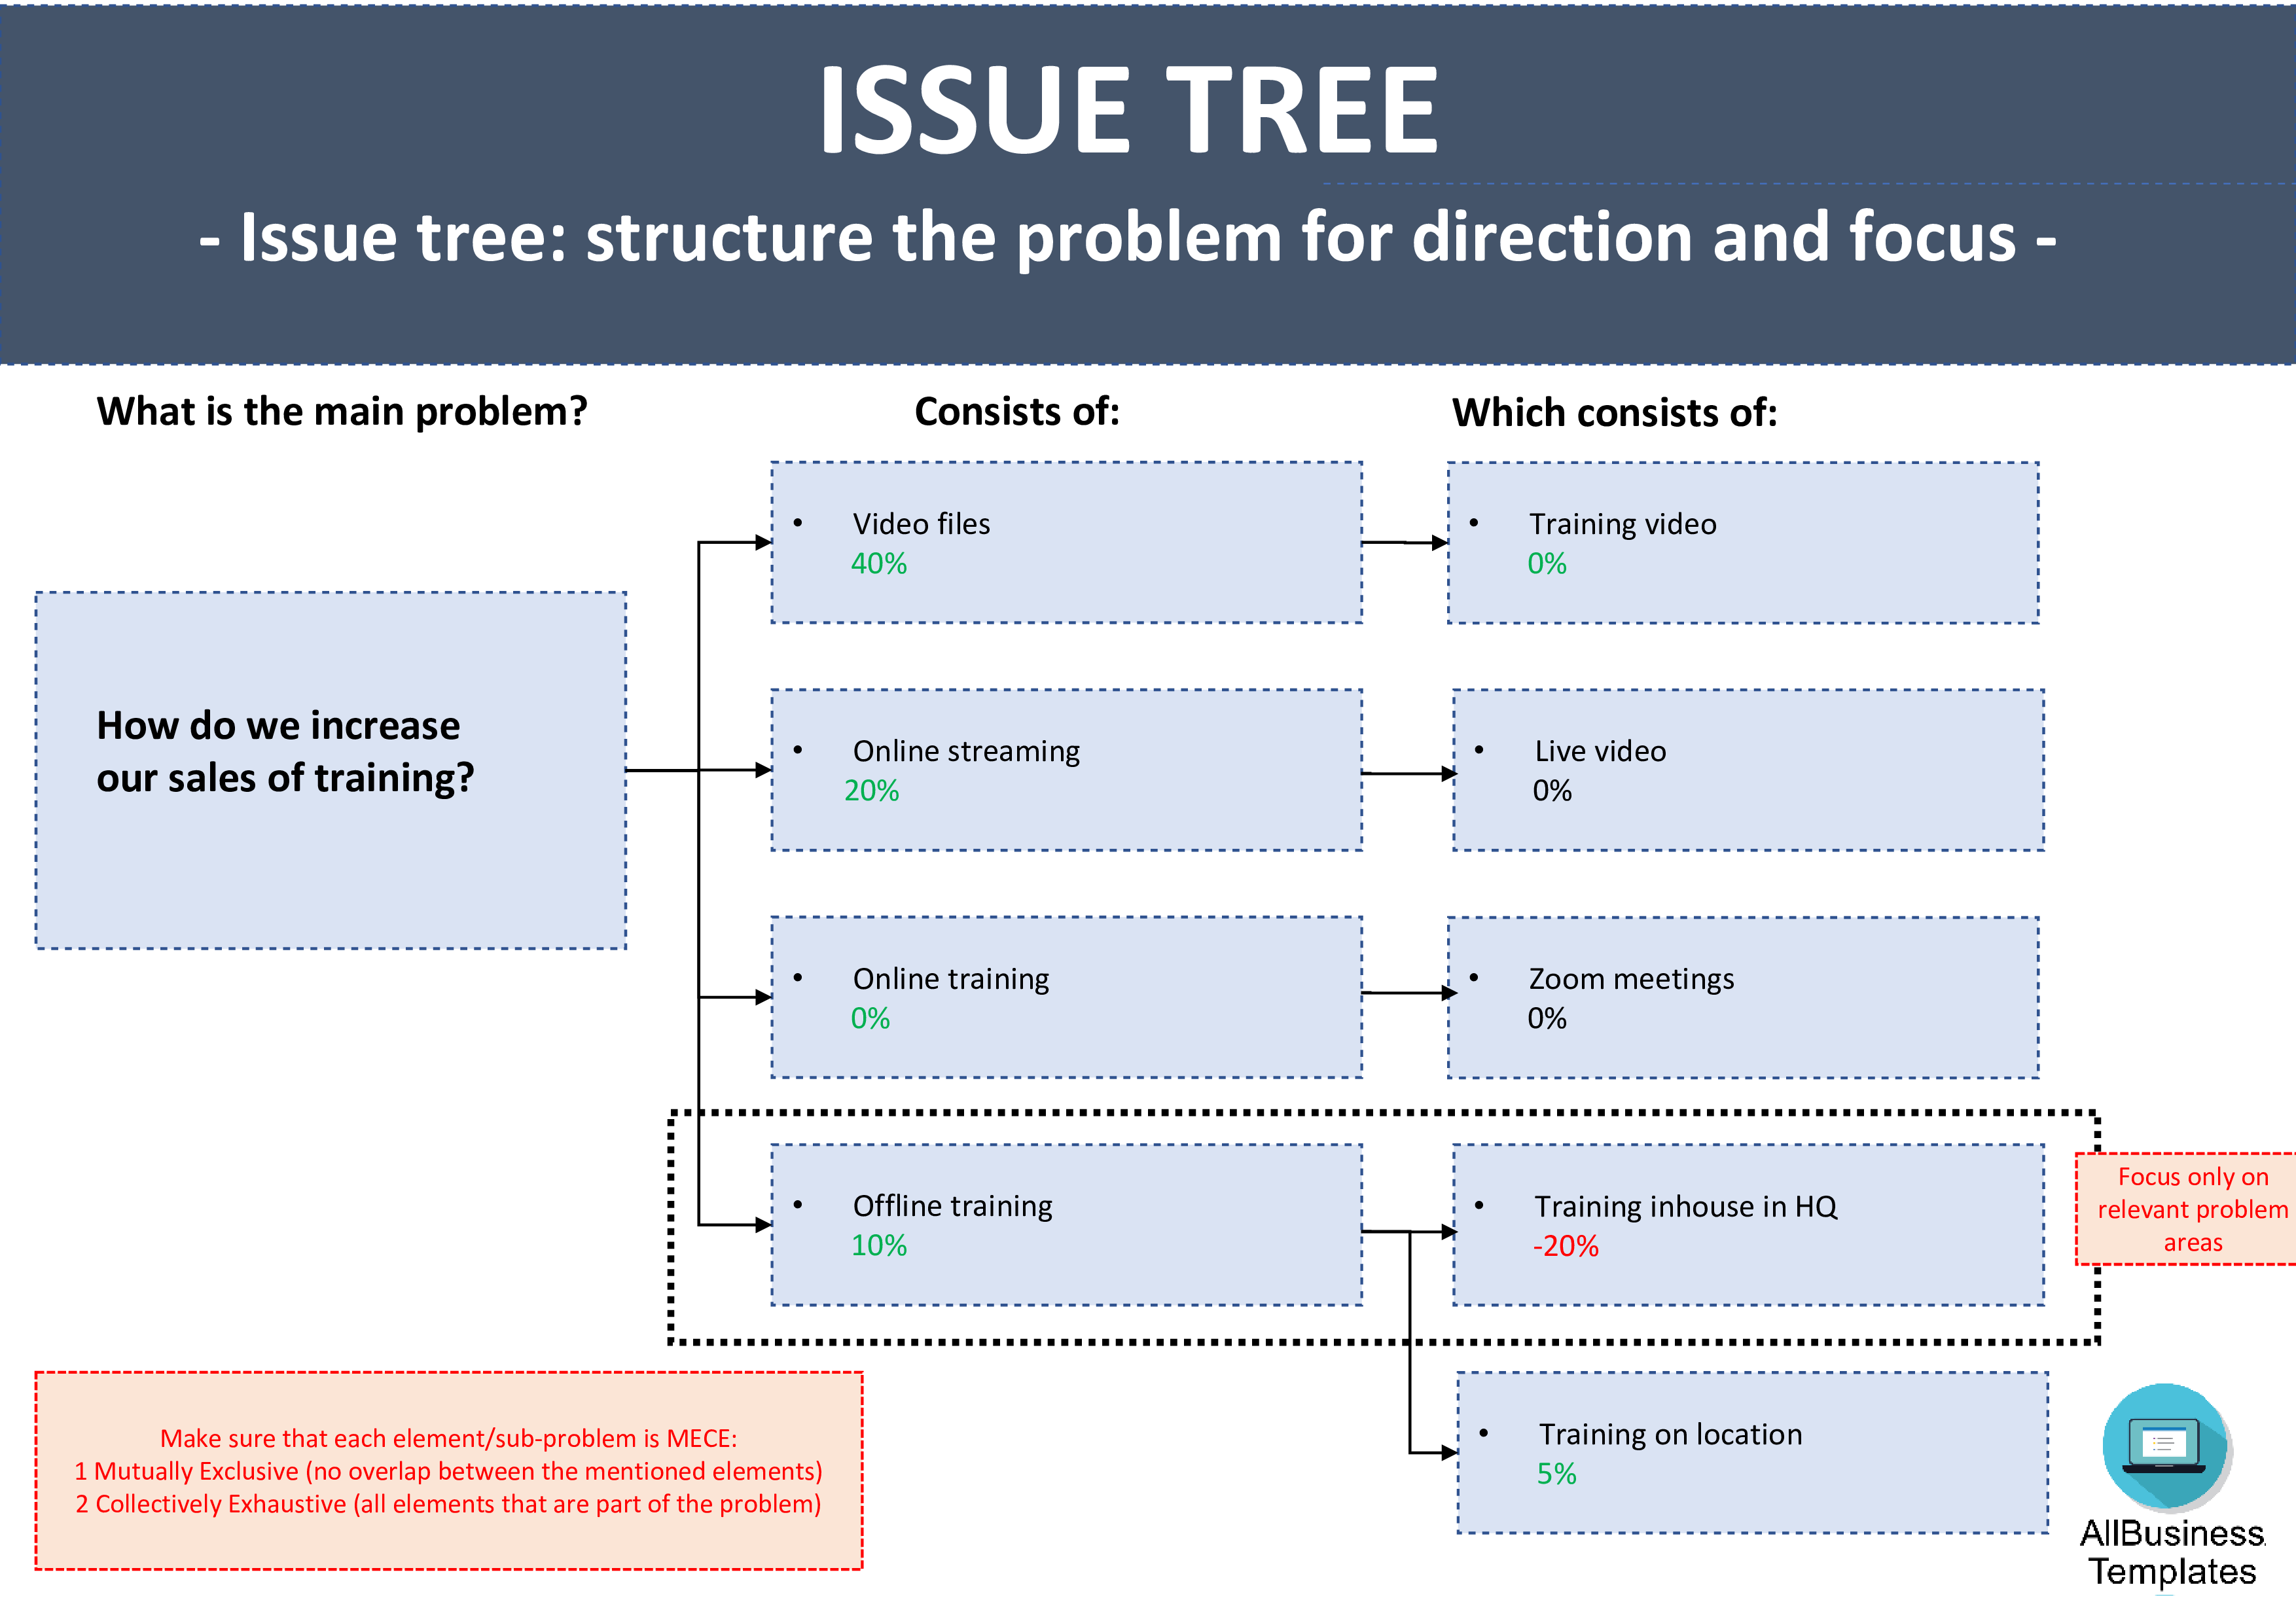 Issue Tree Powerpoint Presentation Templates at